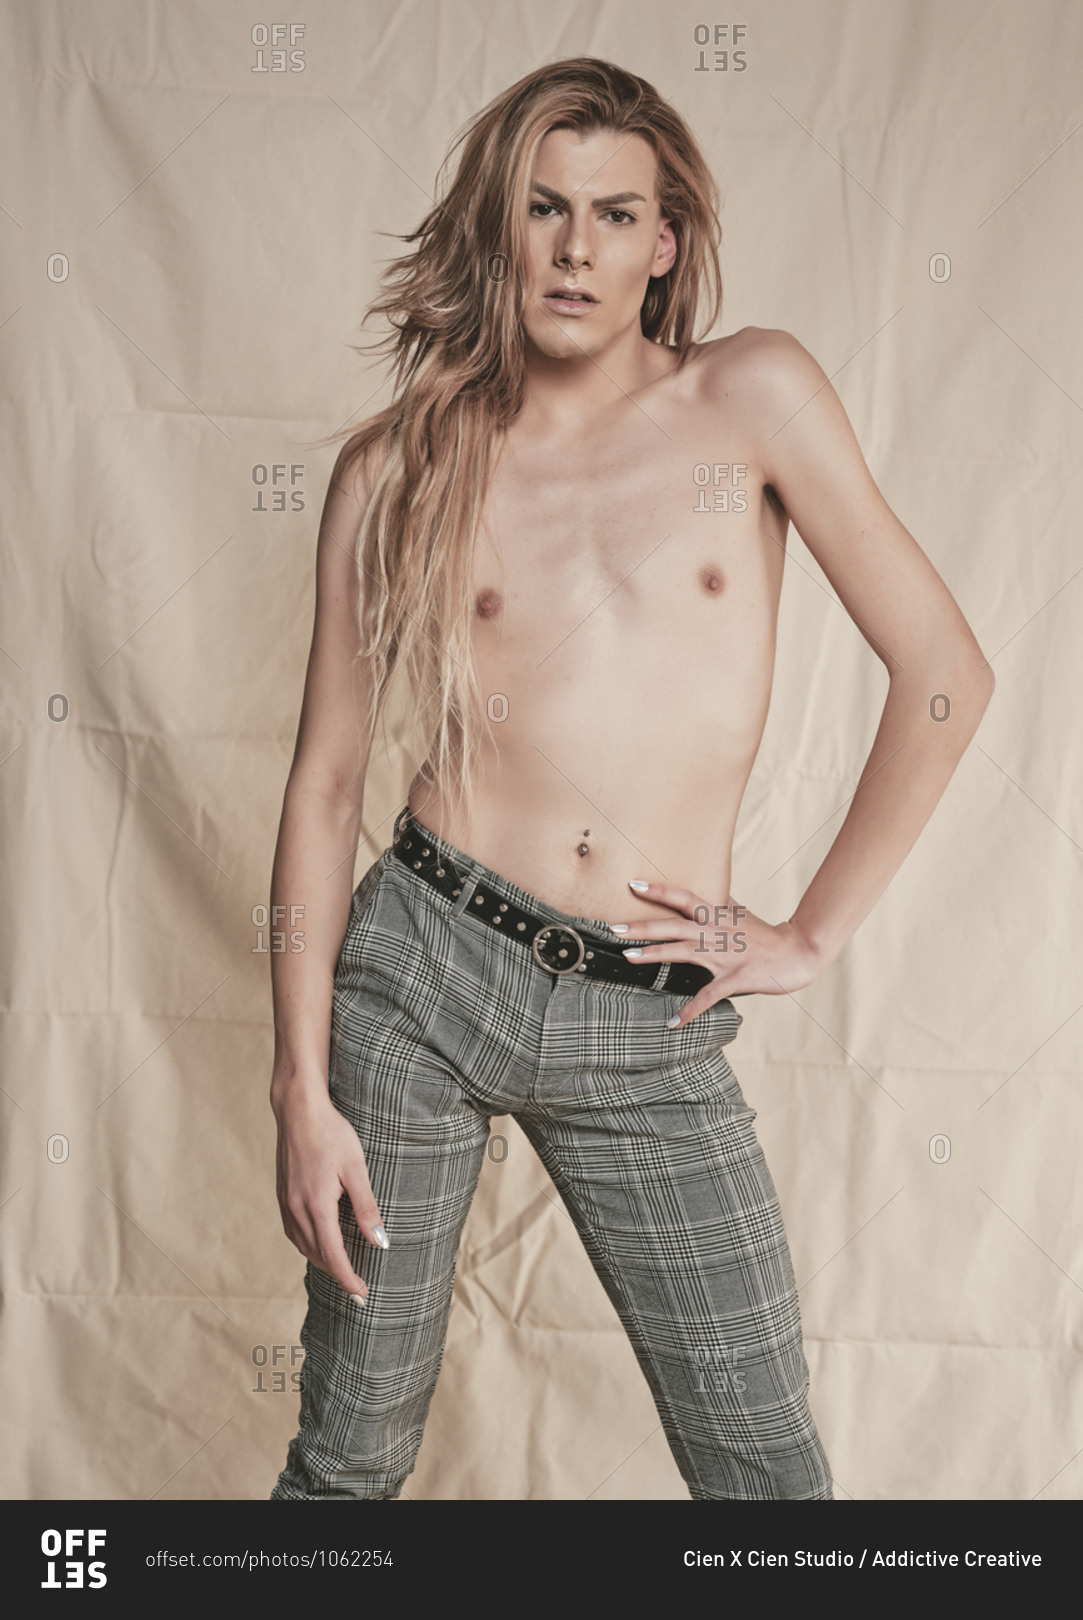 Androgynous young shirtless guy with long hair looking at camera against beige background